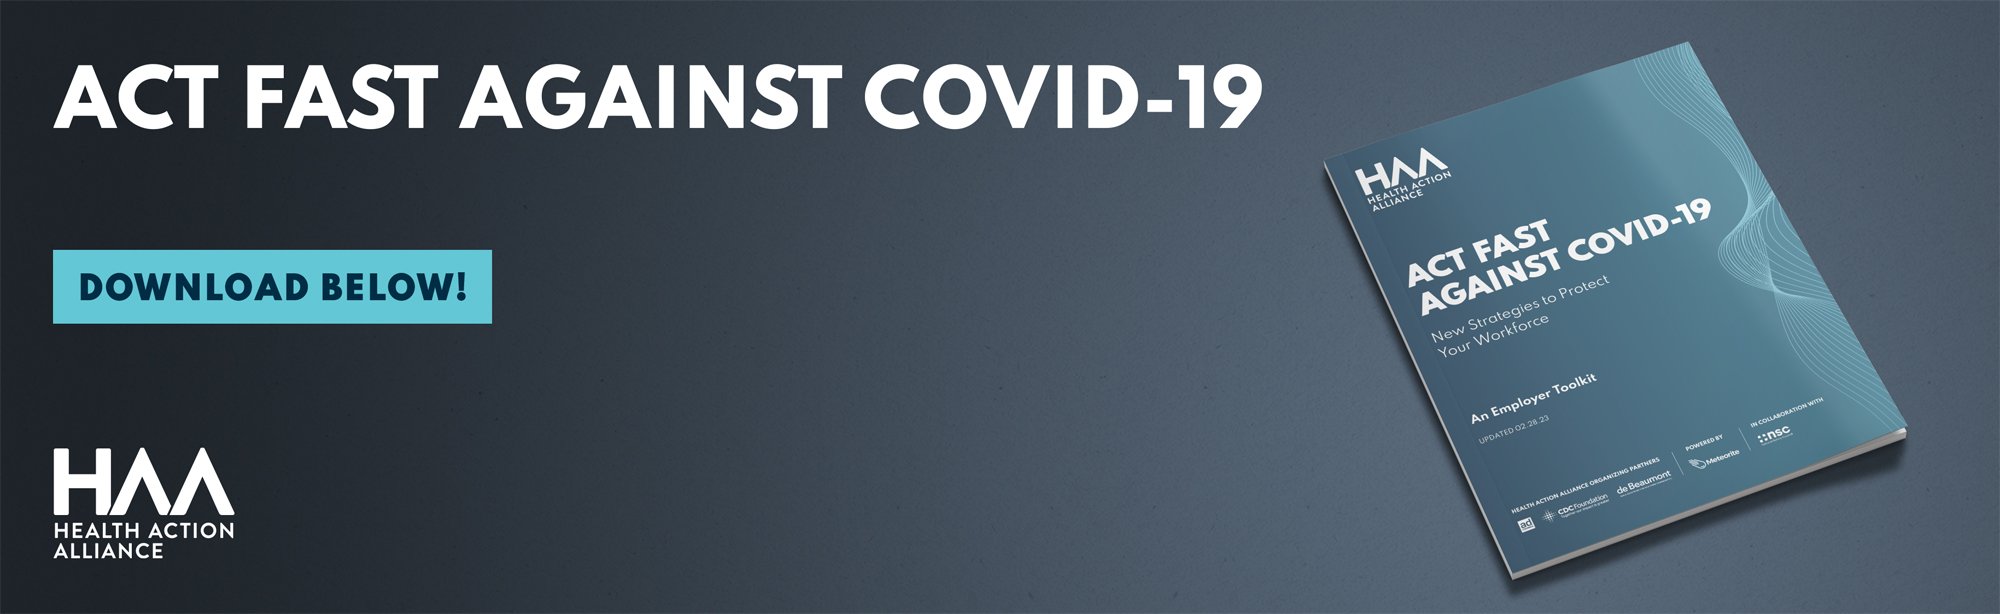 Act-Fast-Against-COVID-19-Banner